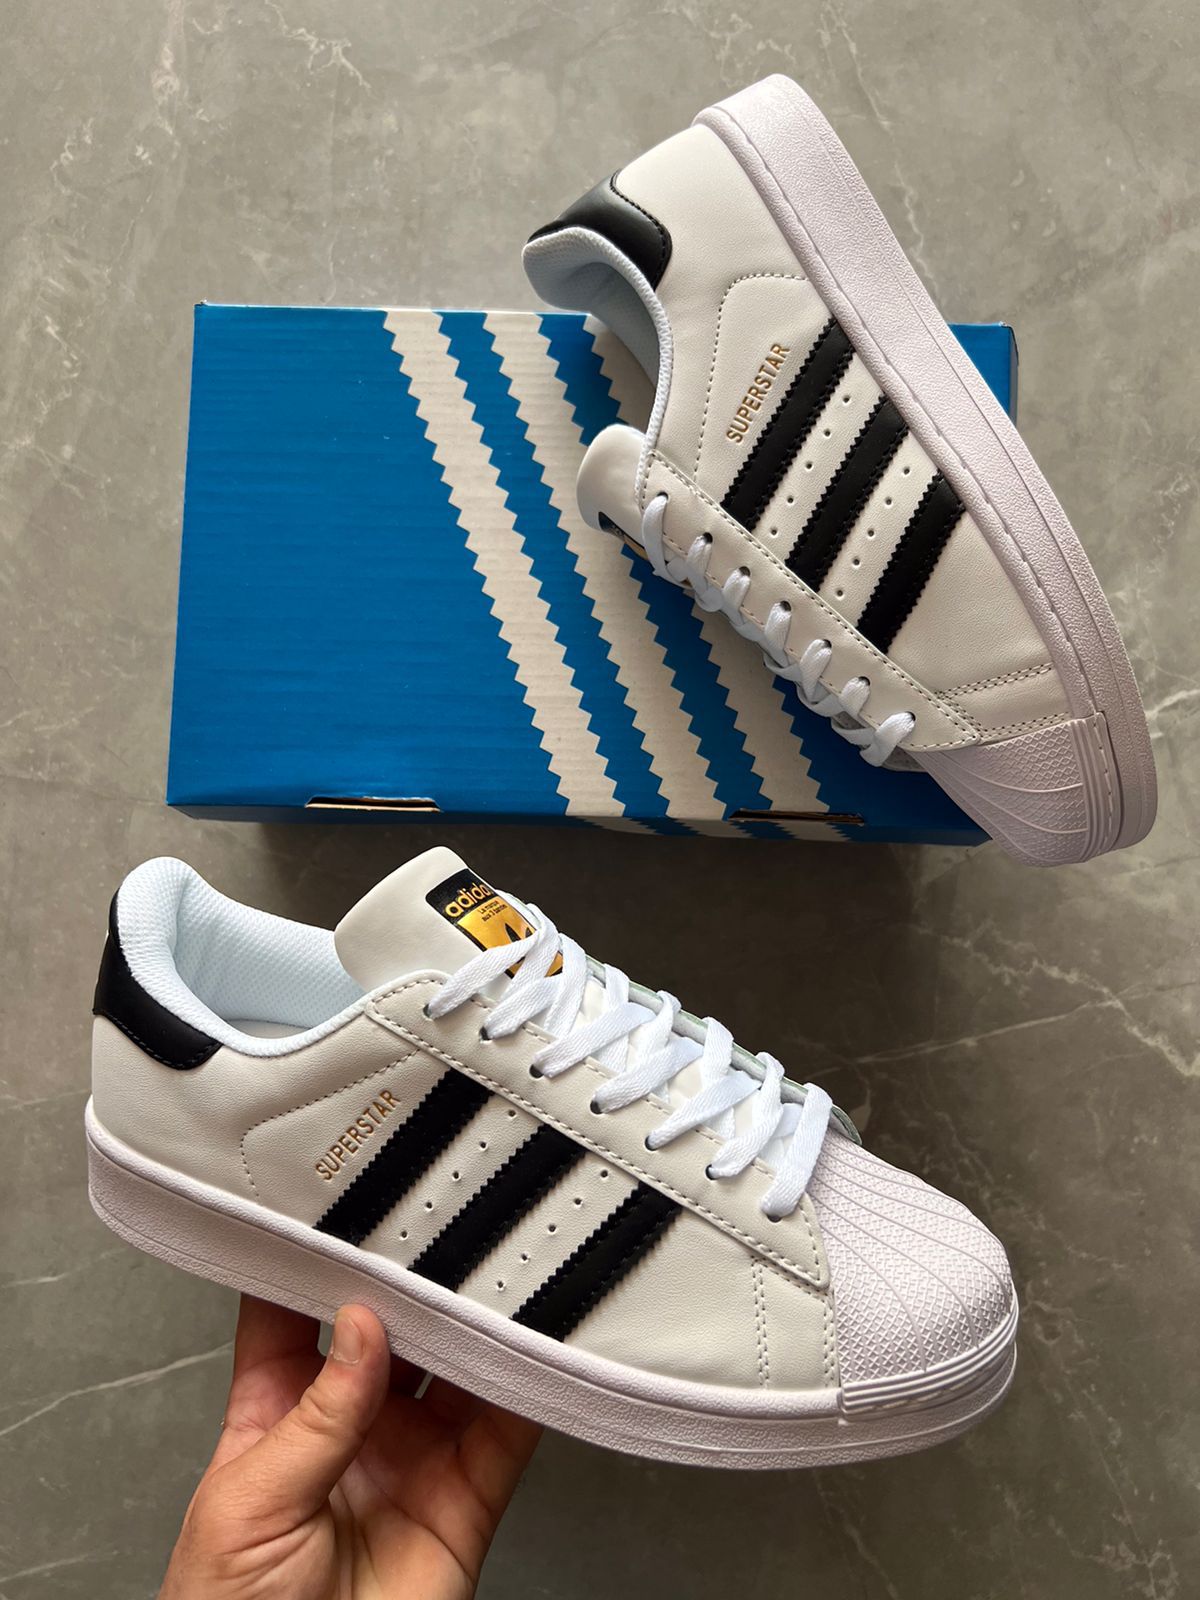 Full Leather Superstar Sneakers